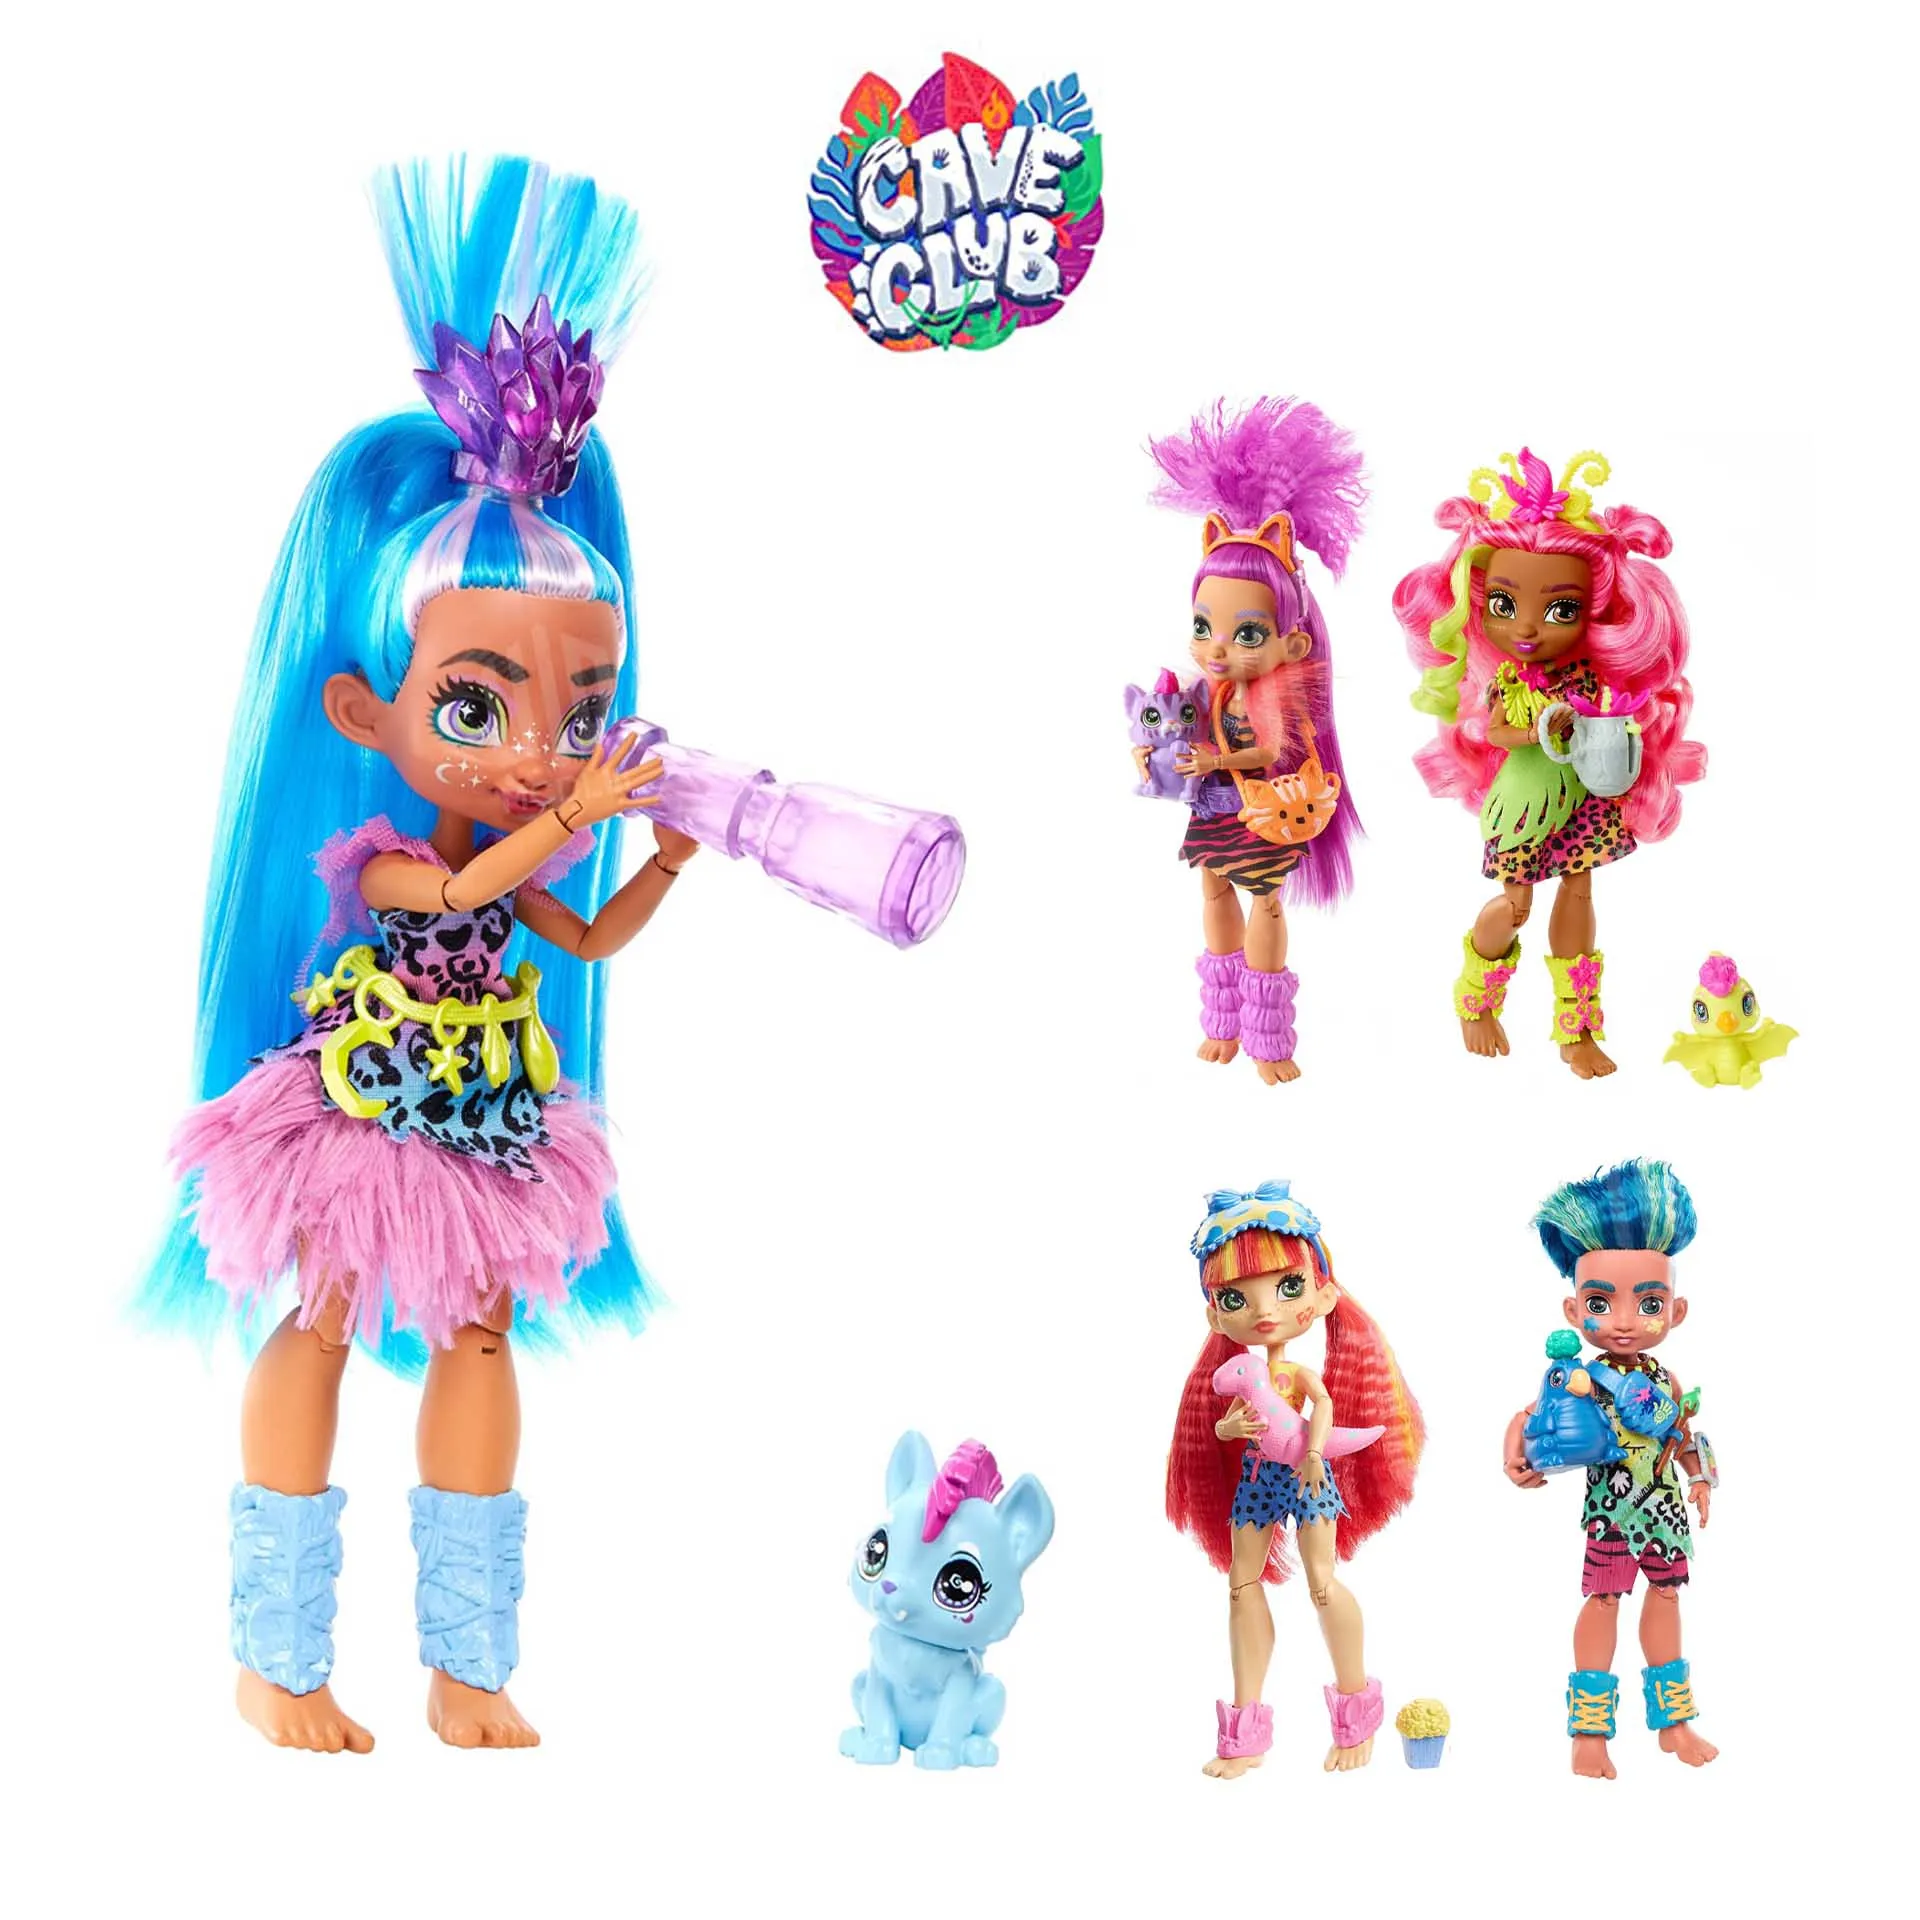 

Mattel Cave Club Dolls Toys Movable Jointed Doll 25cm Prehistoric Fashion Doll Dinosaur Toy Christmas Gift for Girls Toys GTH00